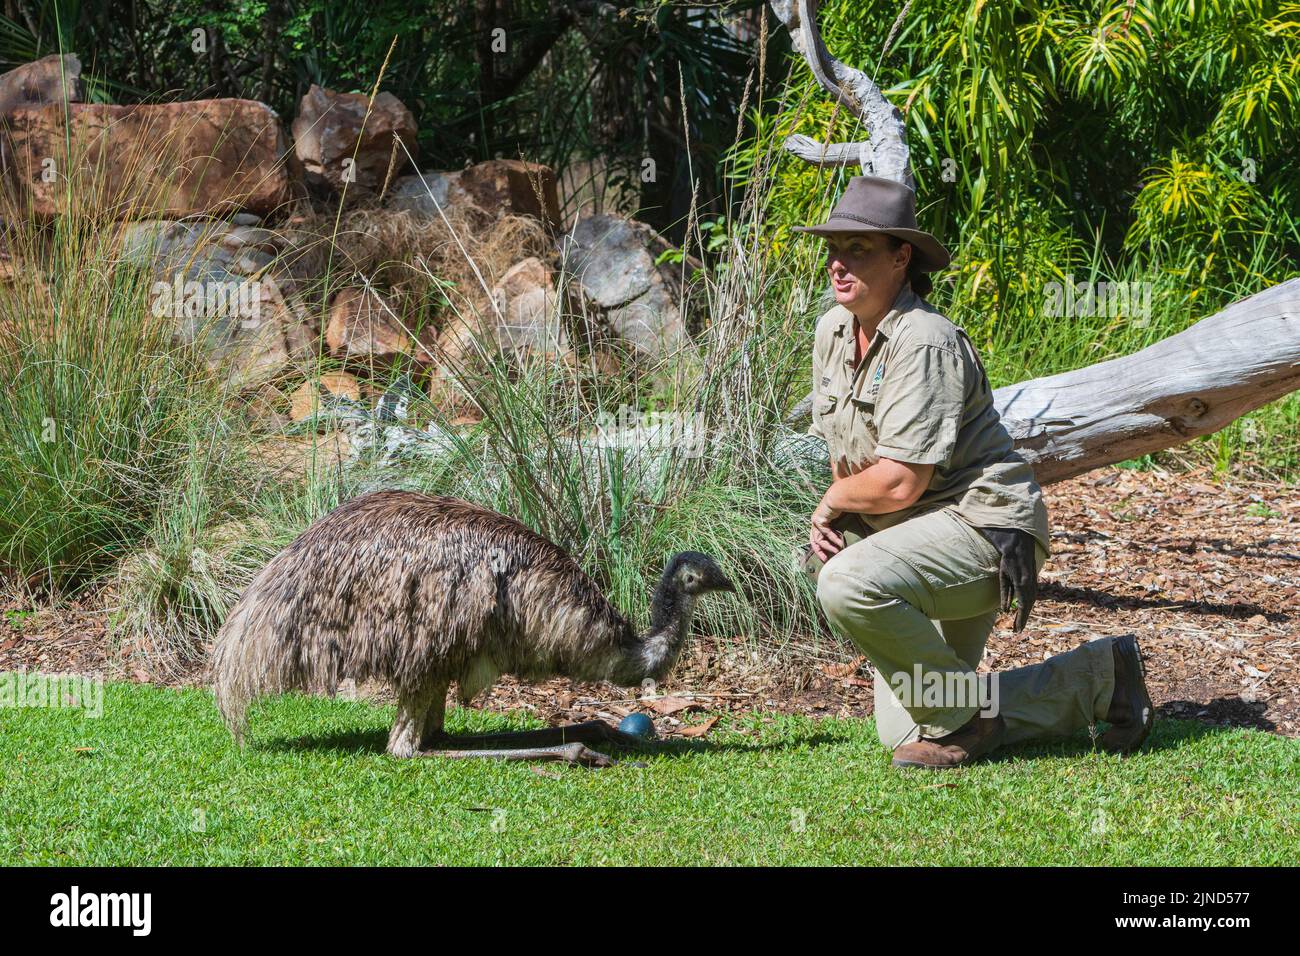 Female Zookeeper with an Emu and a fake emu egg, Wildlife Territory Park, Darwin, Northern Territory, NT, Australia. Controlled conditions. Stock Photo